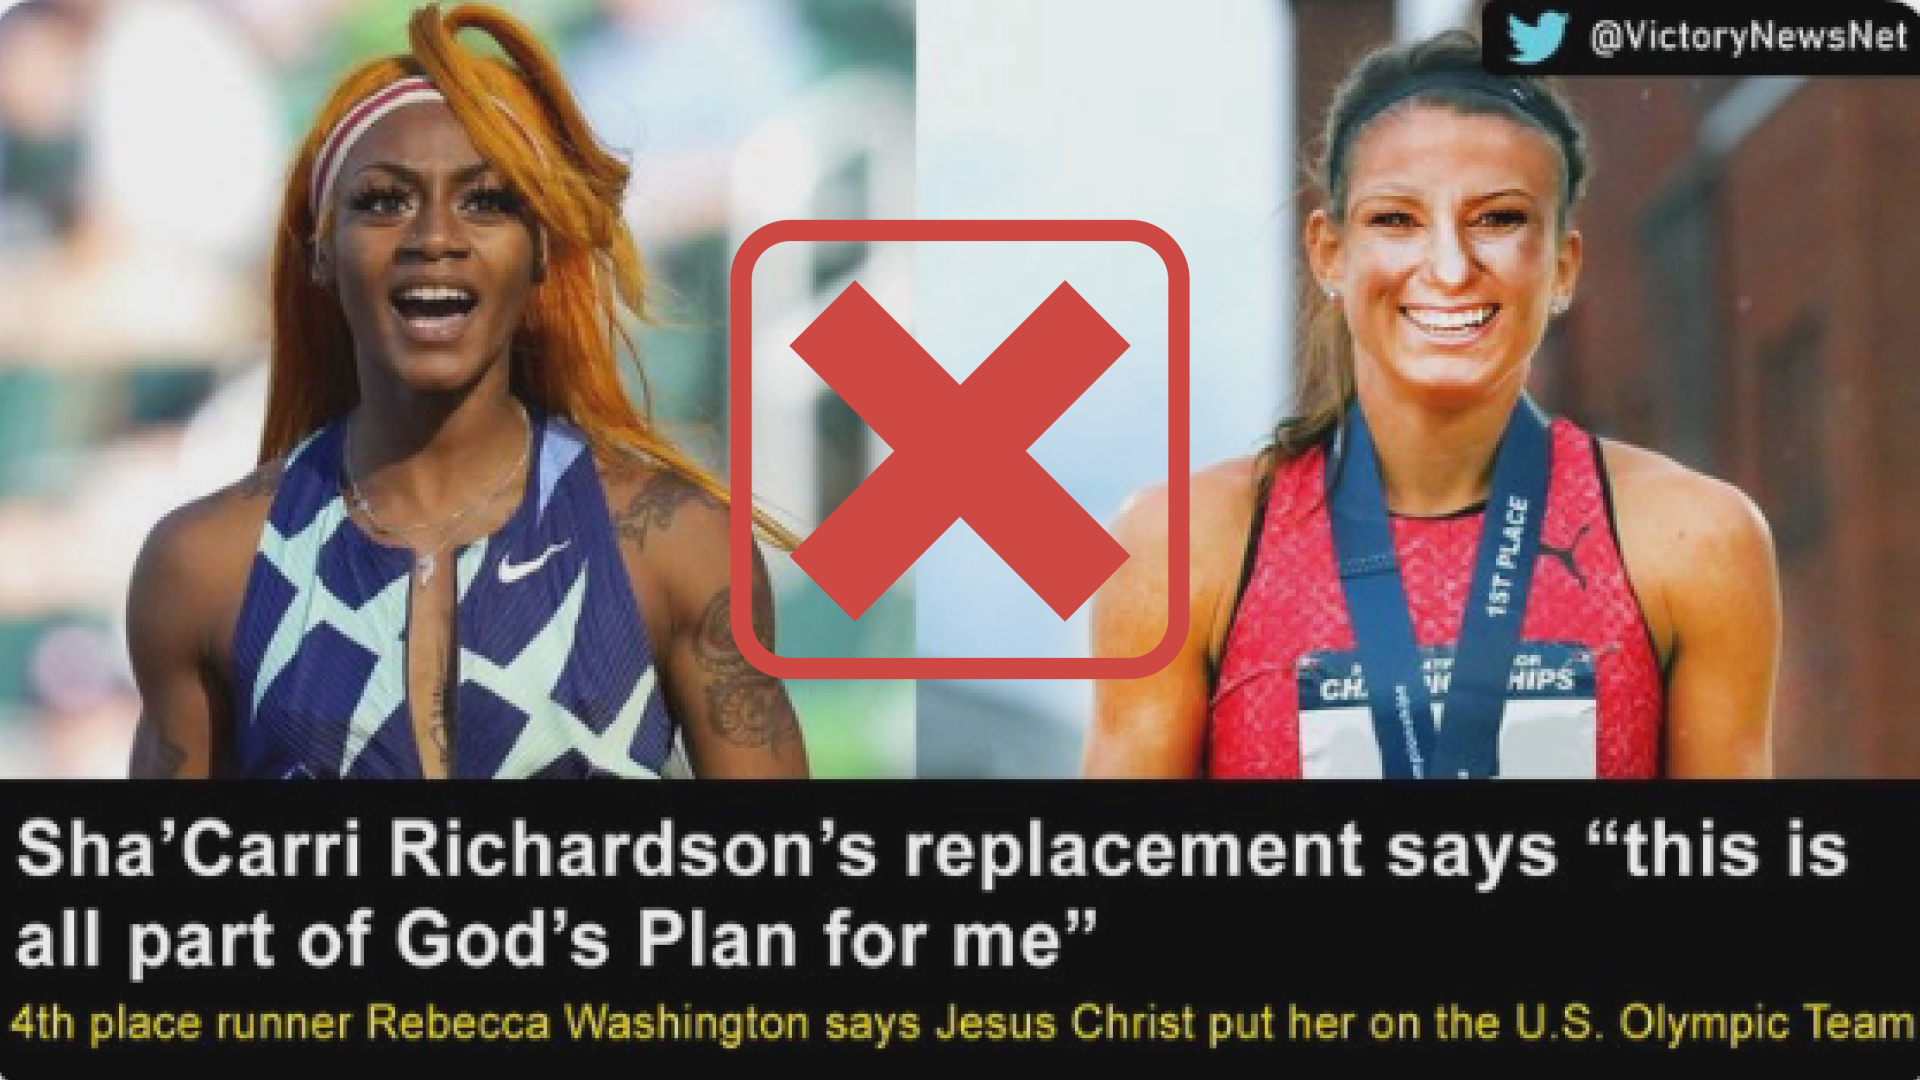 A meme from a parody Twitter account claims a nonexistent runner named Rebecca Washington will replace Sha'Carri Richardson at the Olympics. It's not real.